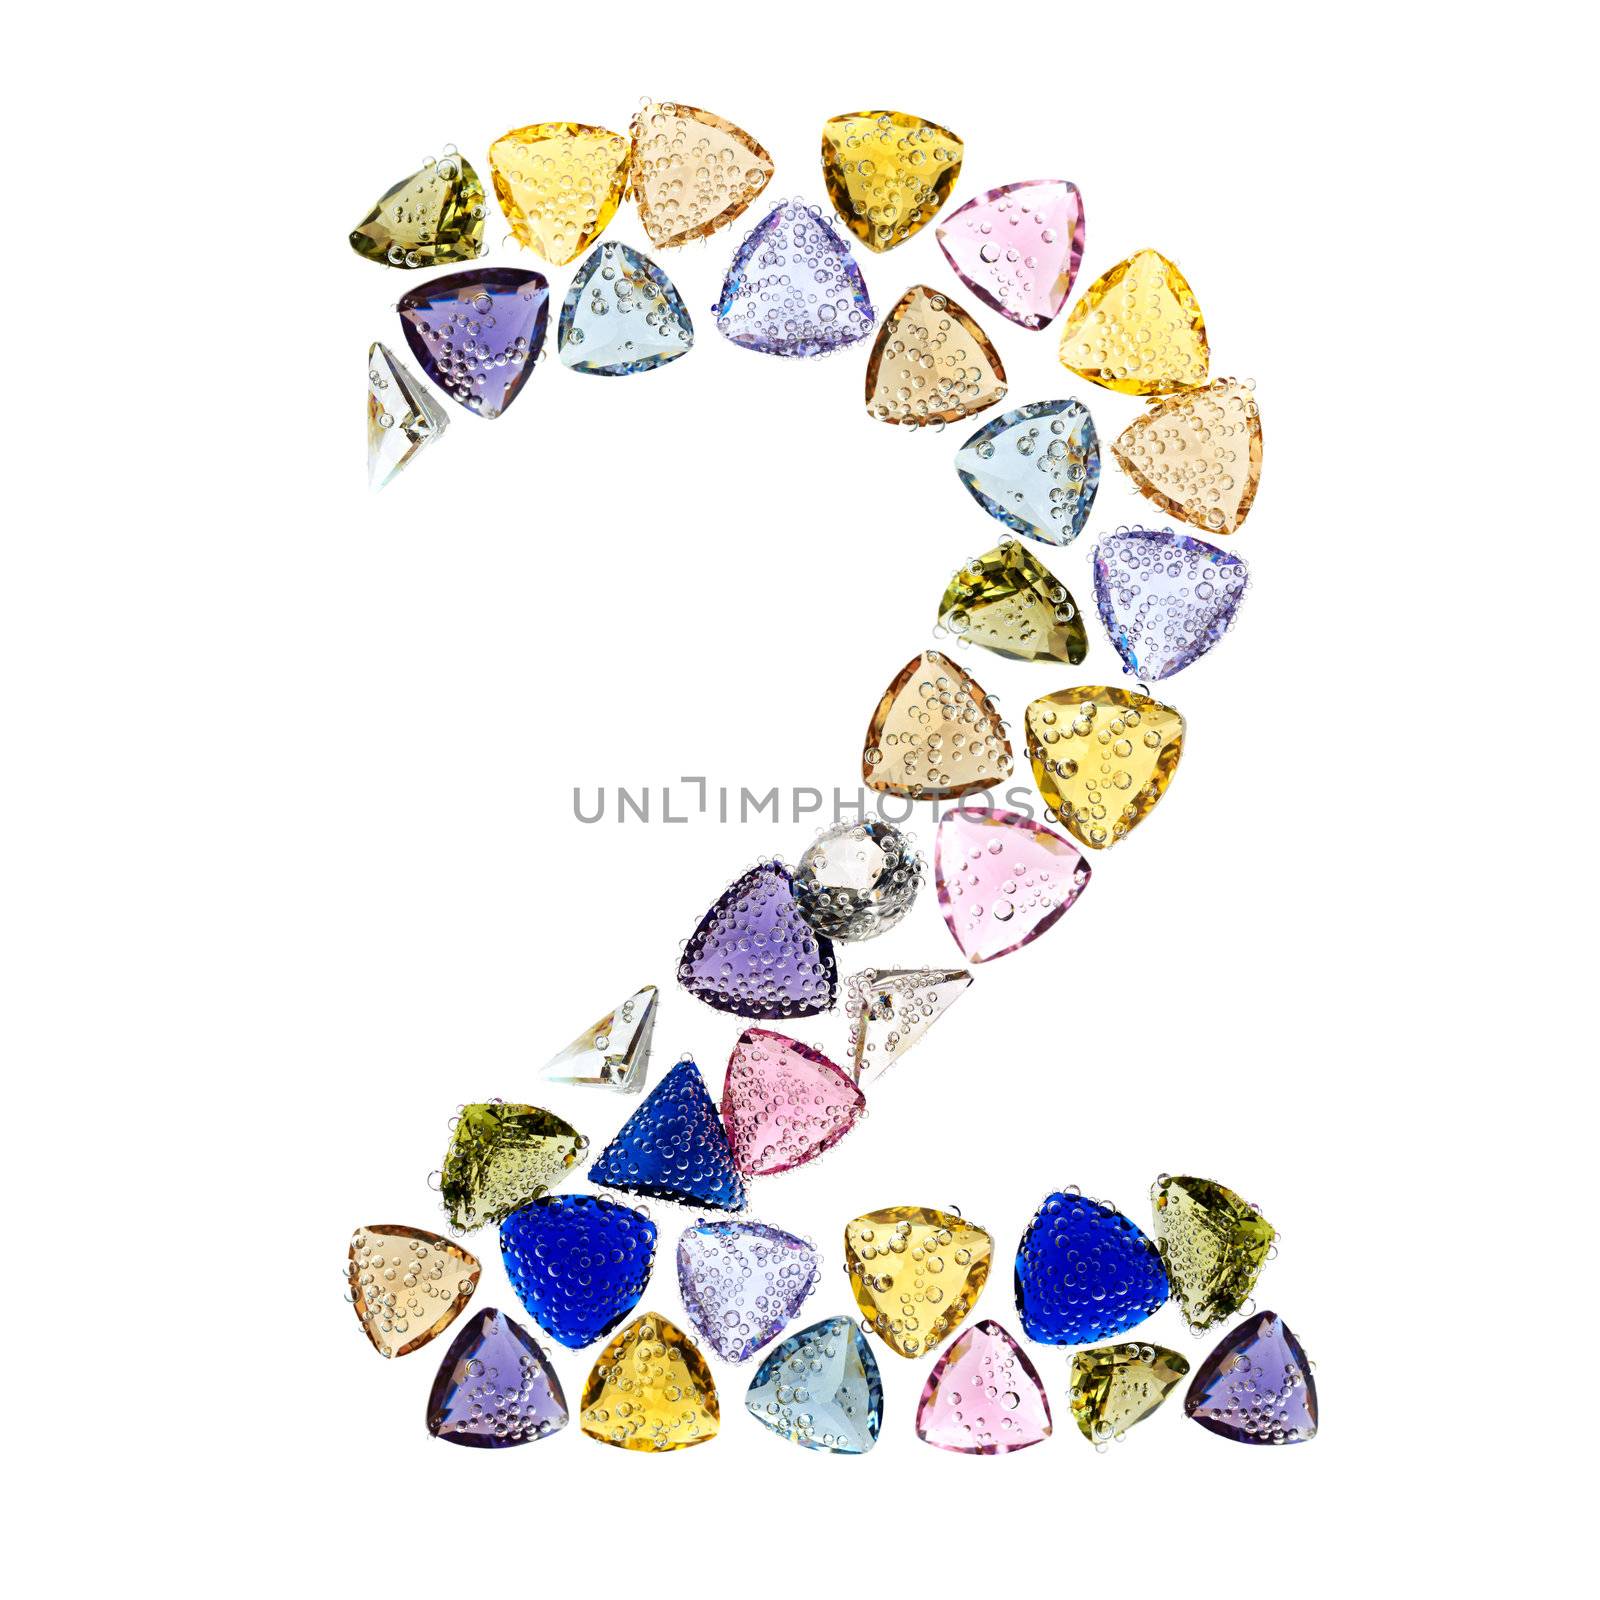 Gemstones numbers collection, figure 2. Isolated on white background.